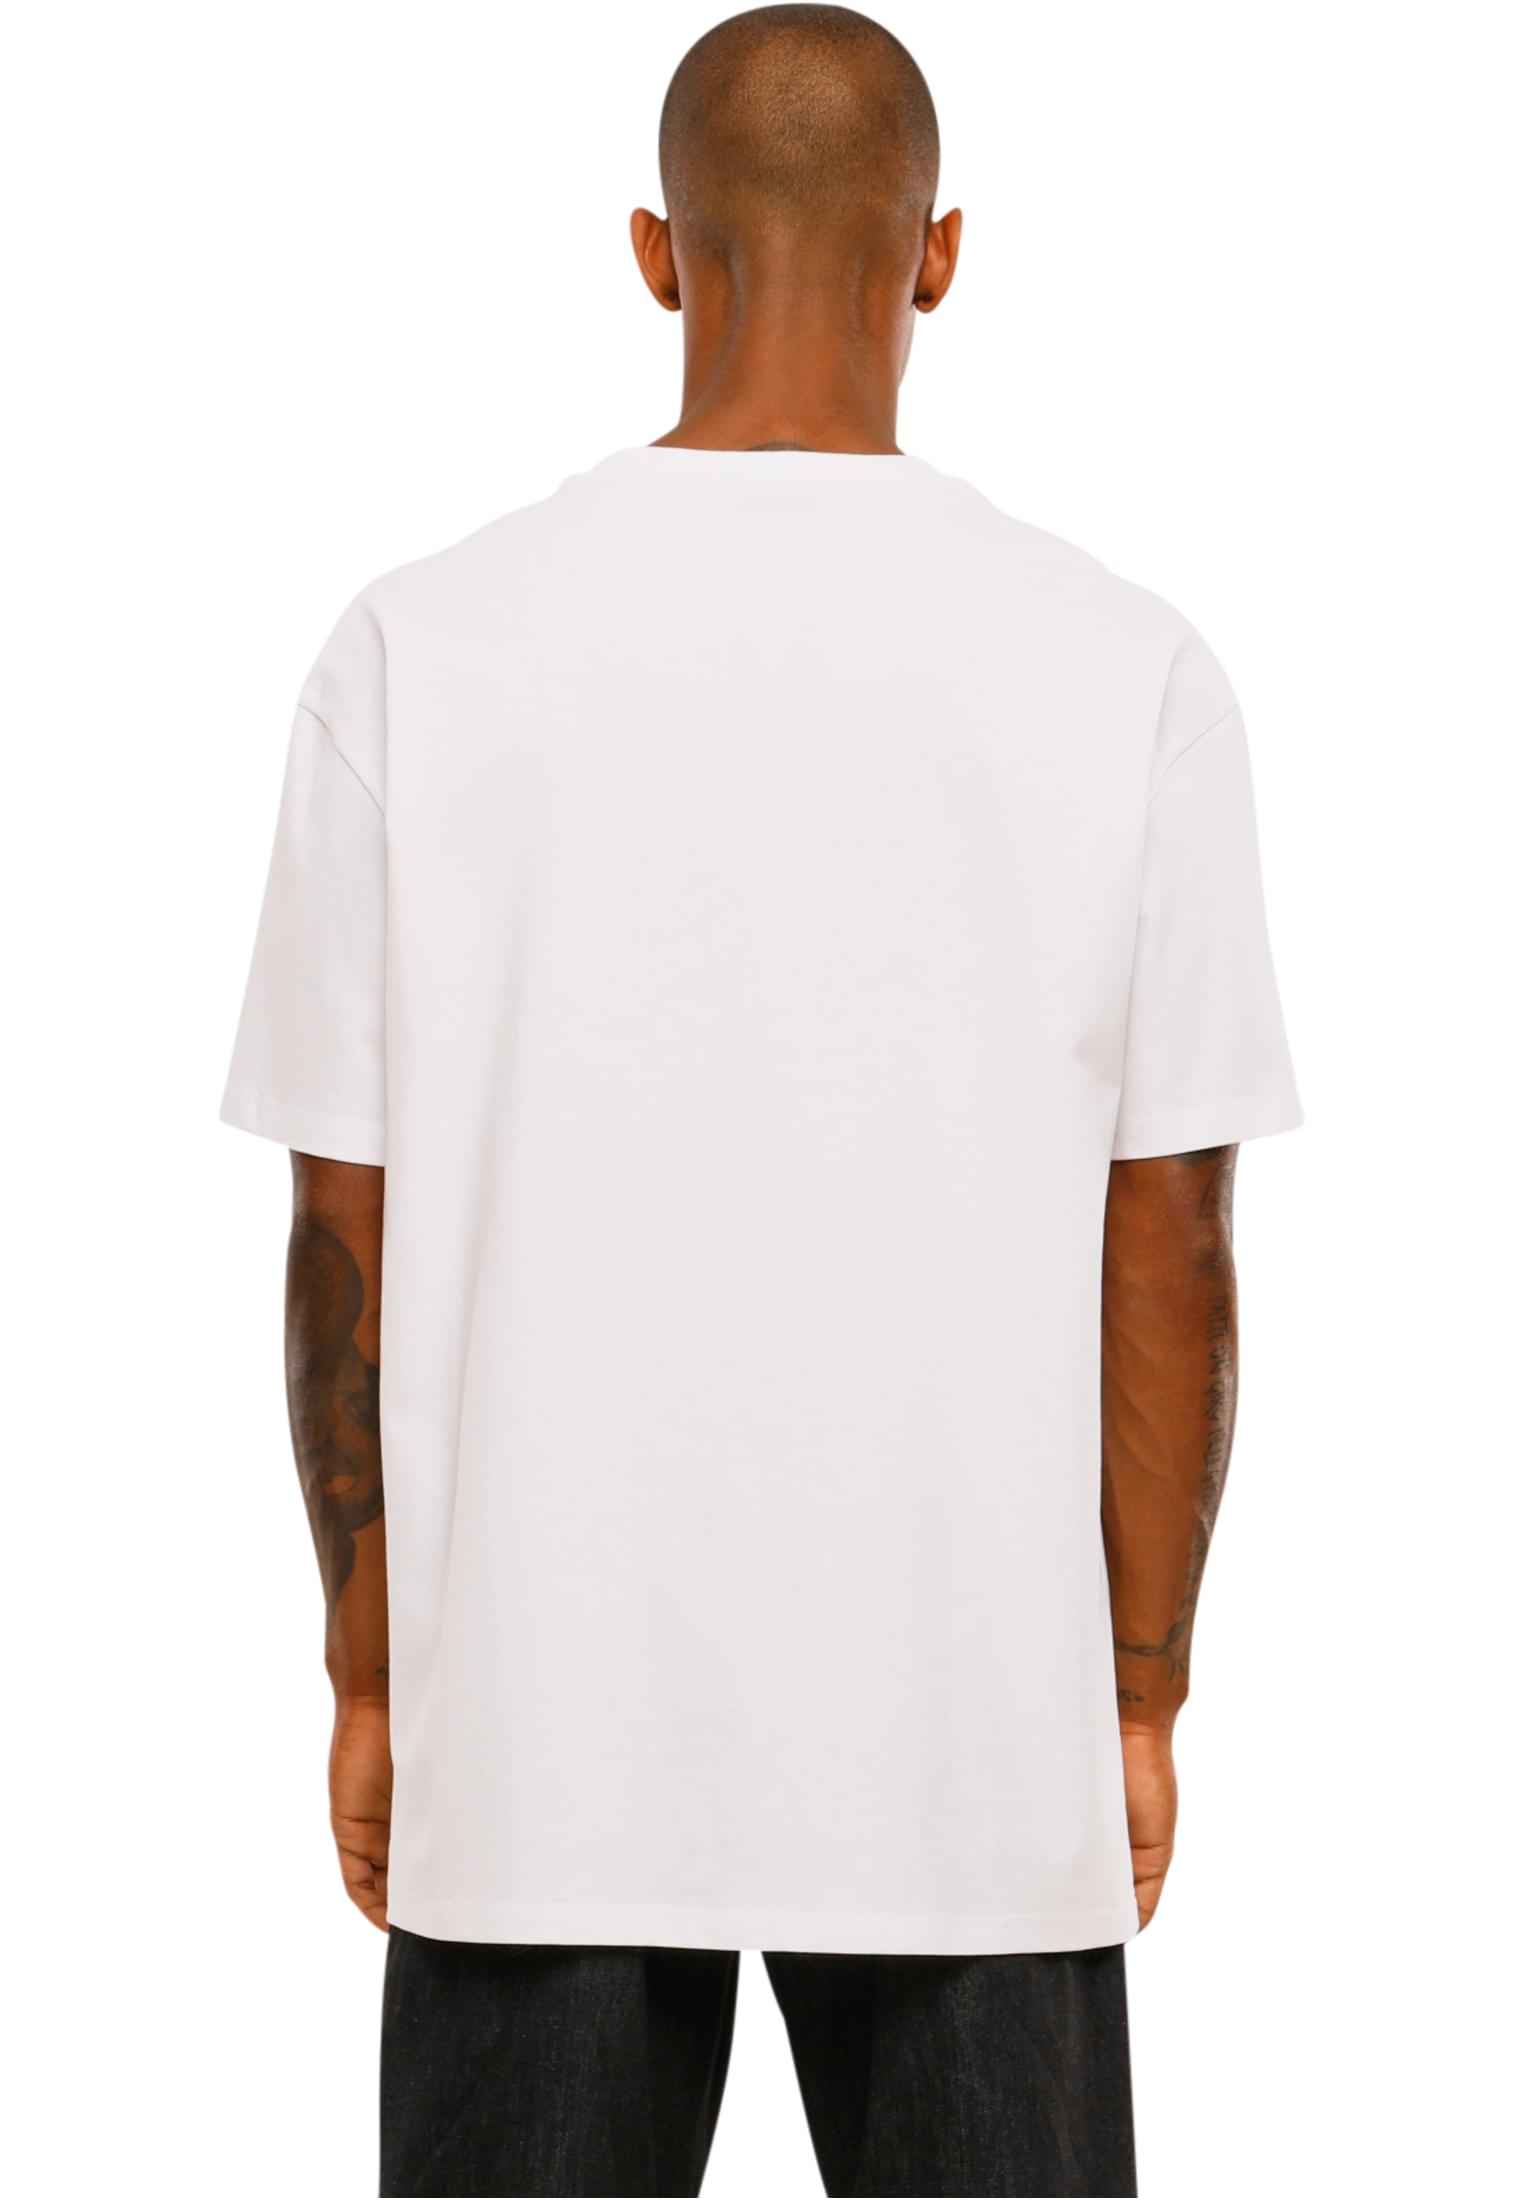 Upscale Studios Hey! My Name Is Oversize T-Shirt white im BAWRZ® One Stop Hip-Hop Shop